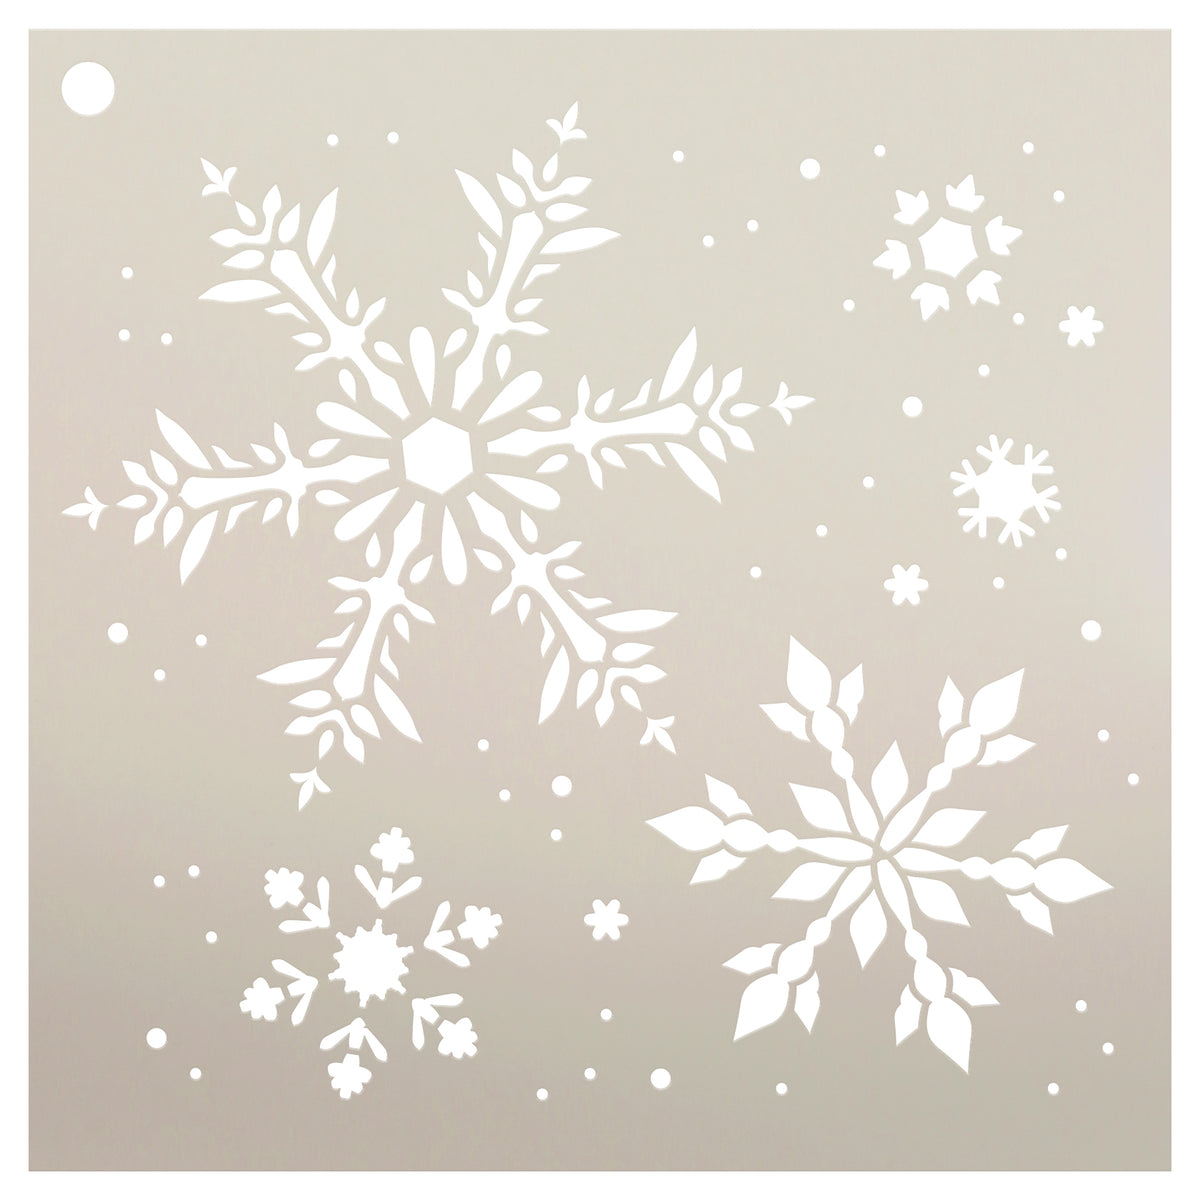 Snowflakes Stencil by StudioR12 Craft & Paint Christmas Holiday Home Decor DIY Scrapbooking & Wall Art Background Select Size 18 x 18 inch